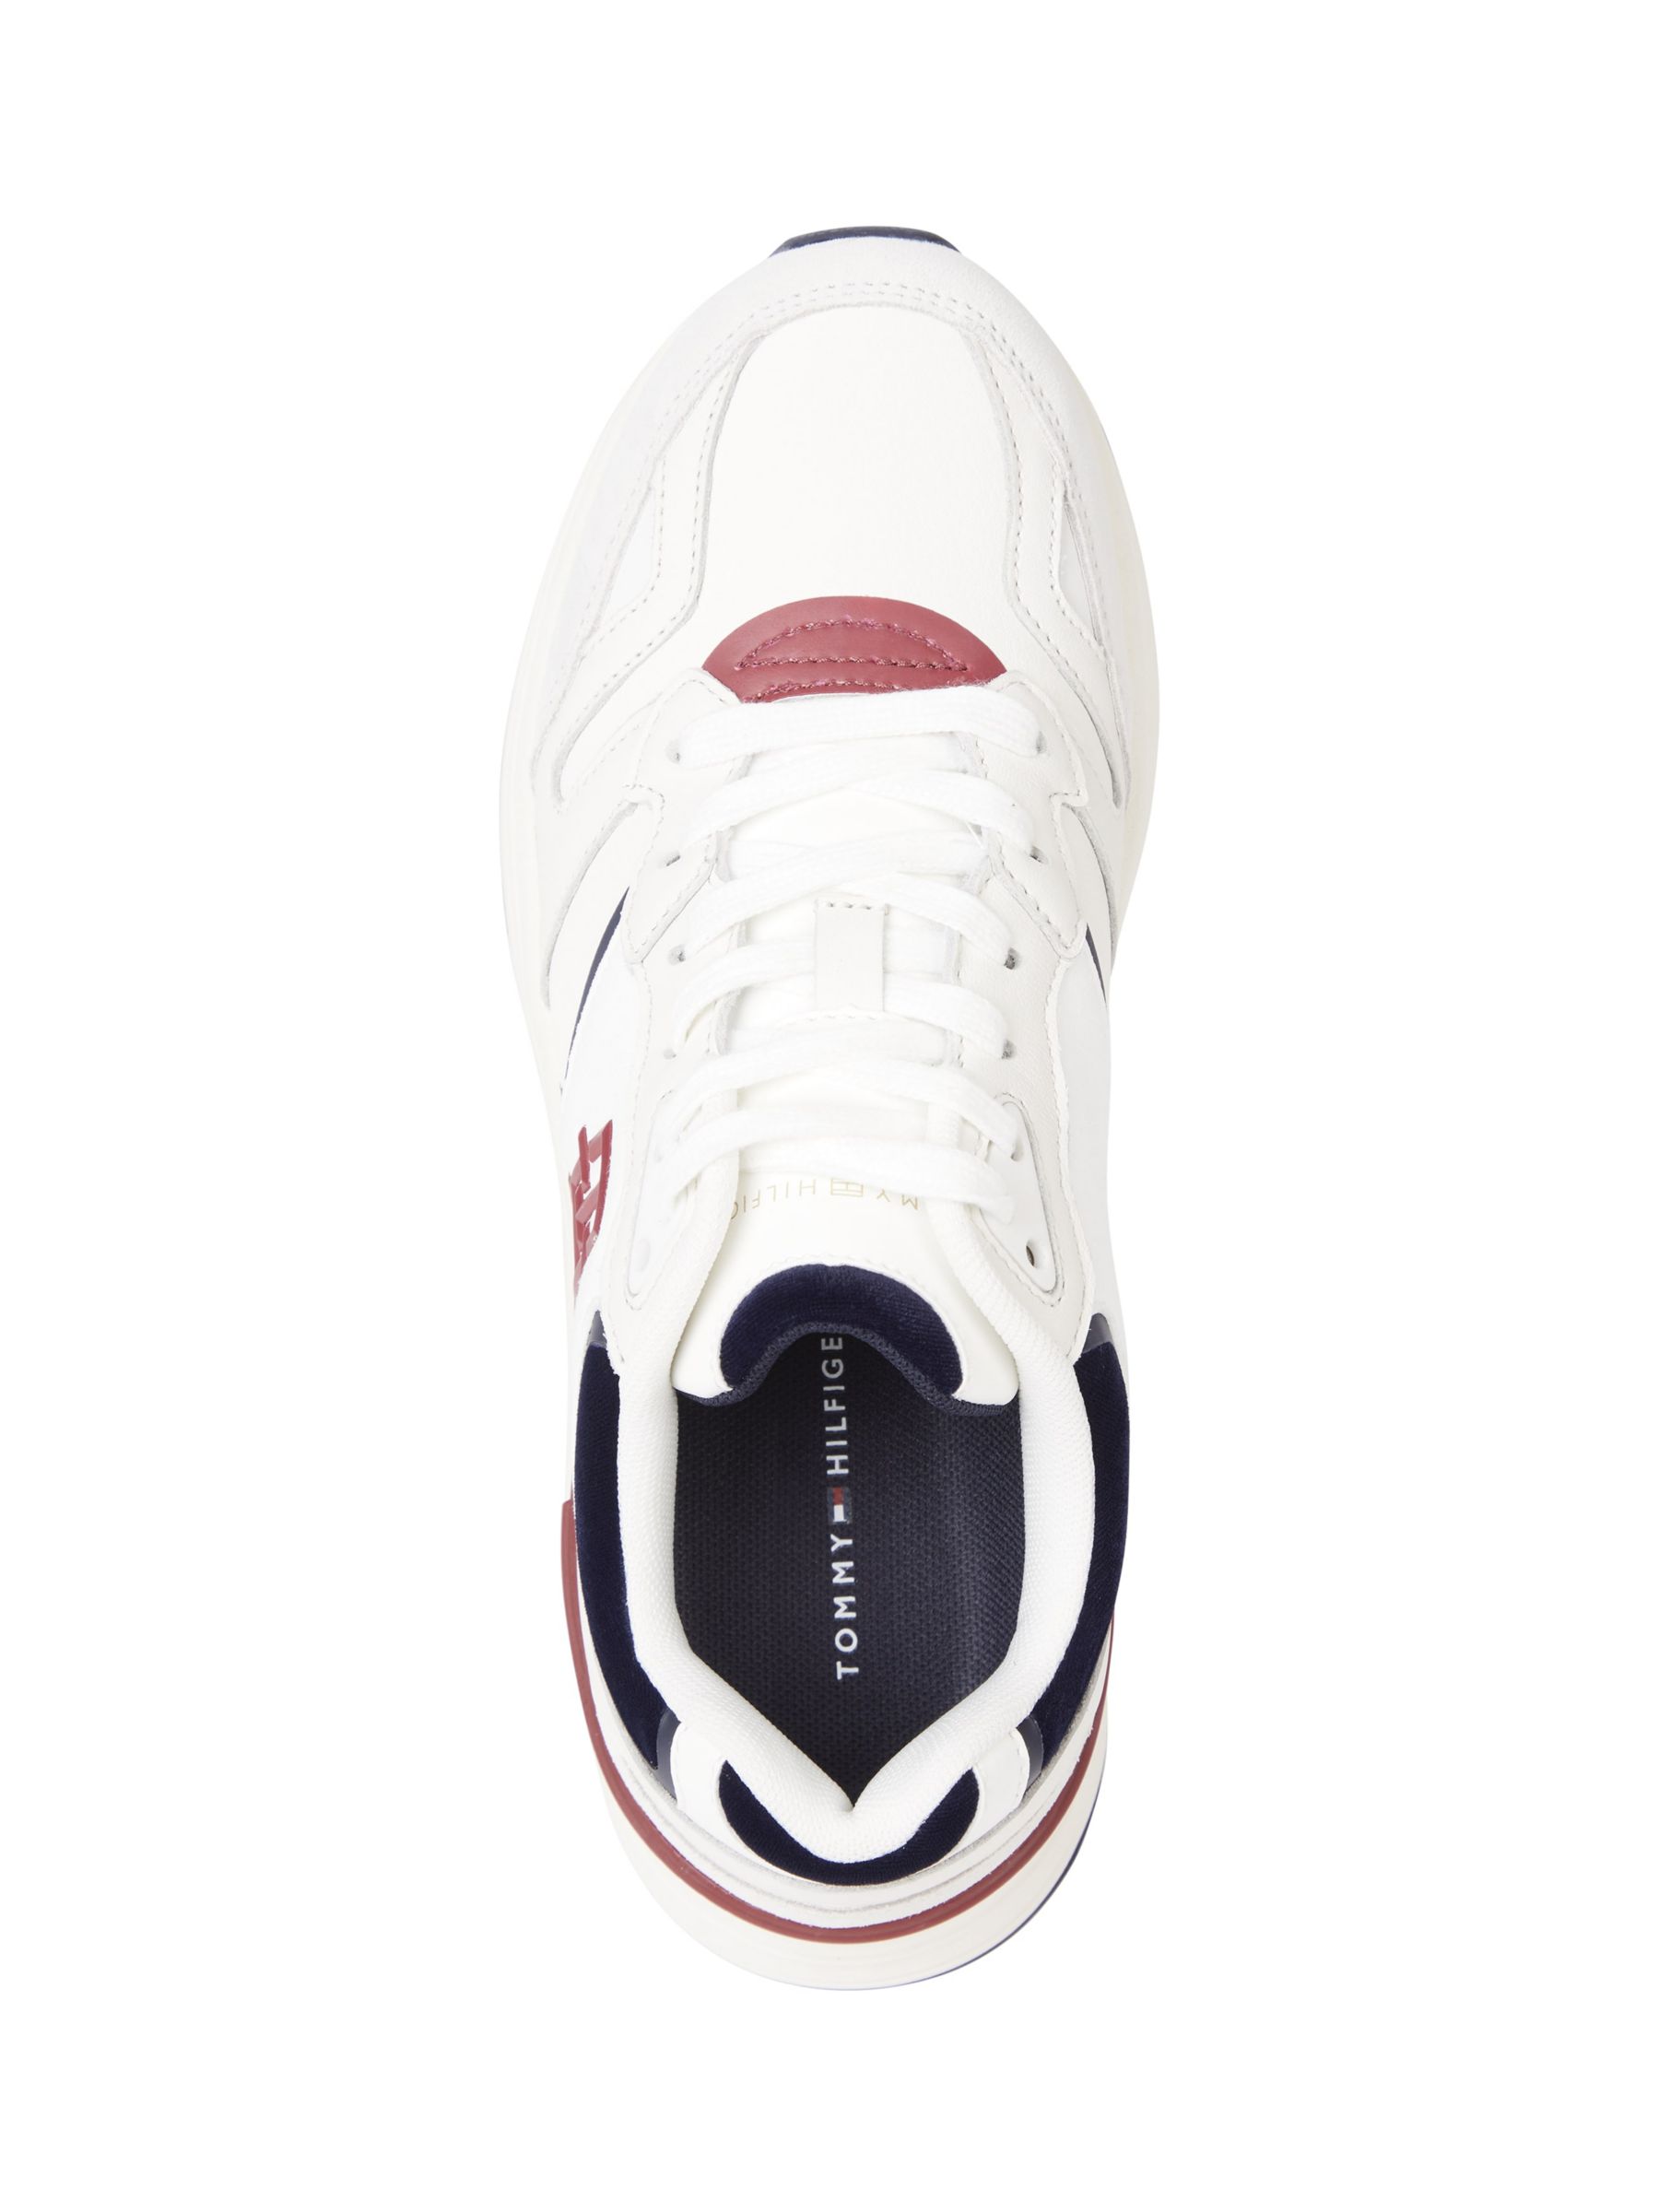 Tommy Hilfiger Leather Preppy Trainers, White at John Lewis & Partners